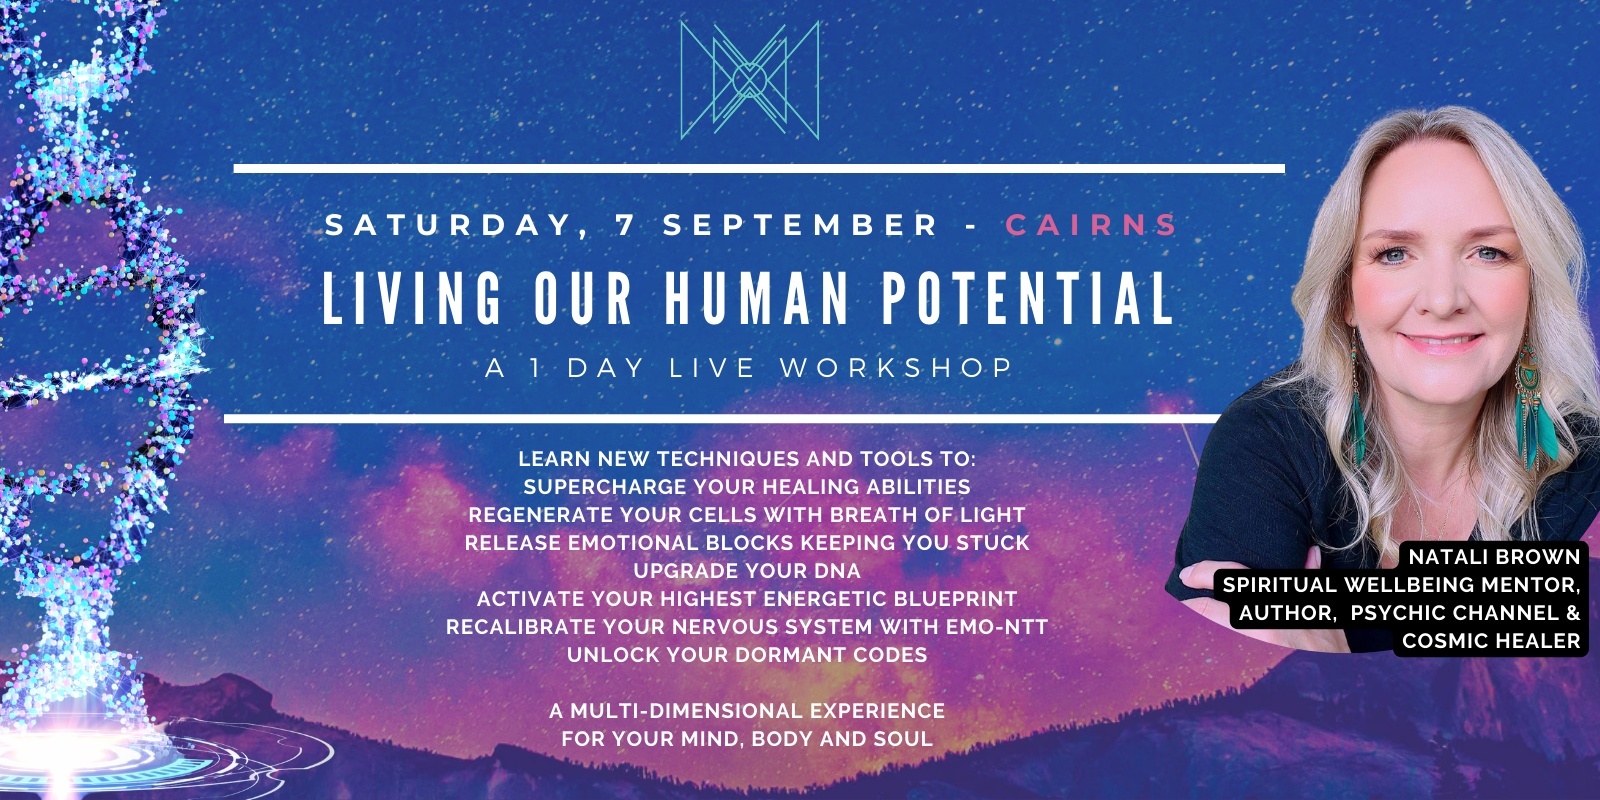 Banner image for CAIRNS - Living Our Human Potential Live Workshop - The Becoming 'Super Human' Series with Natali Brown